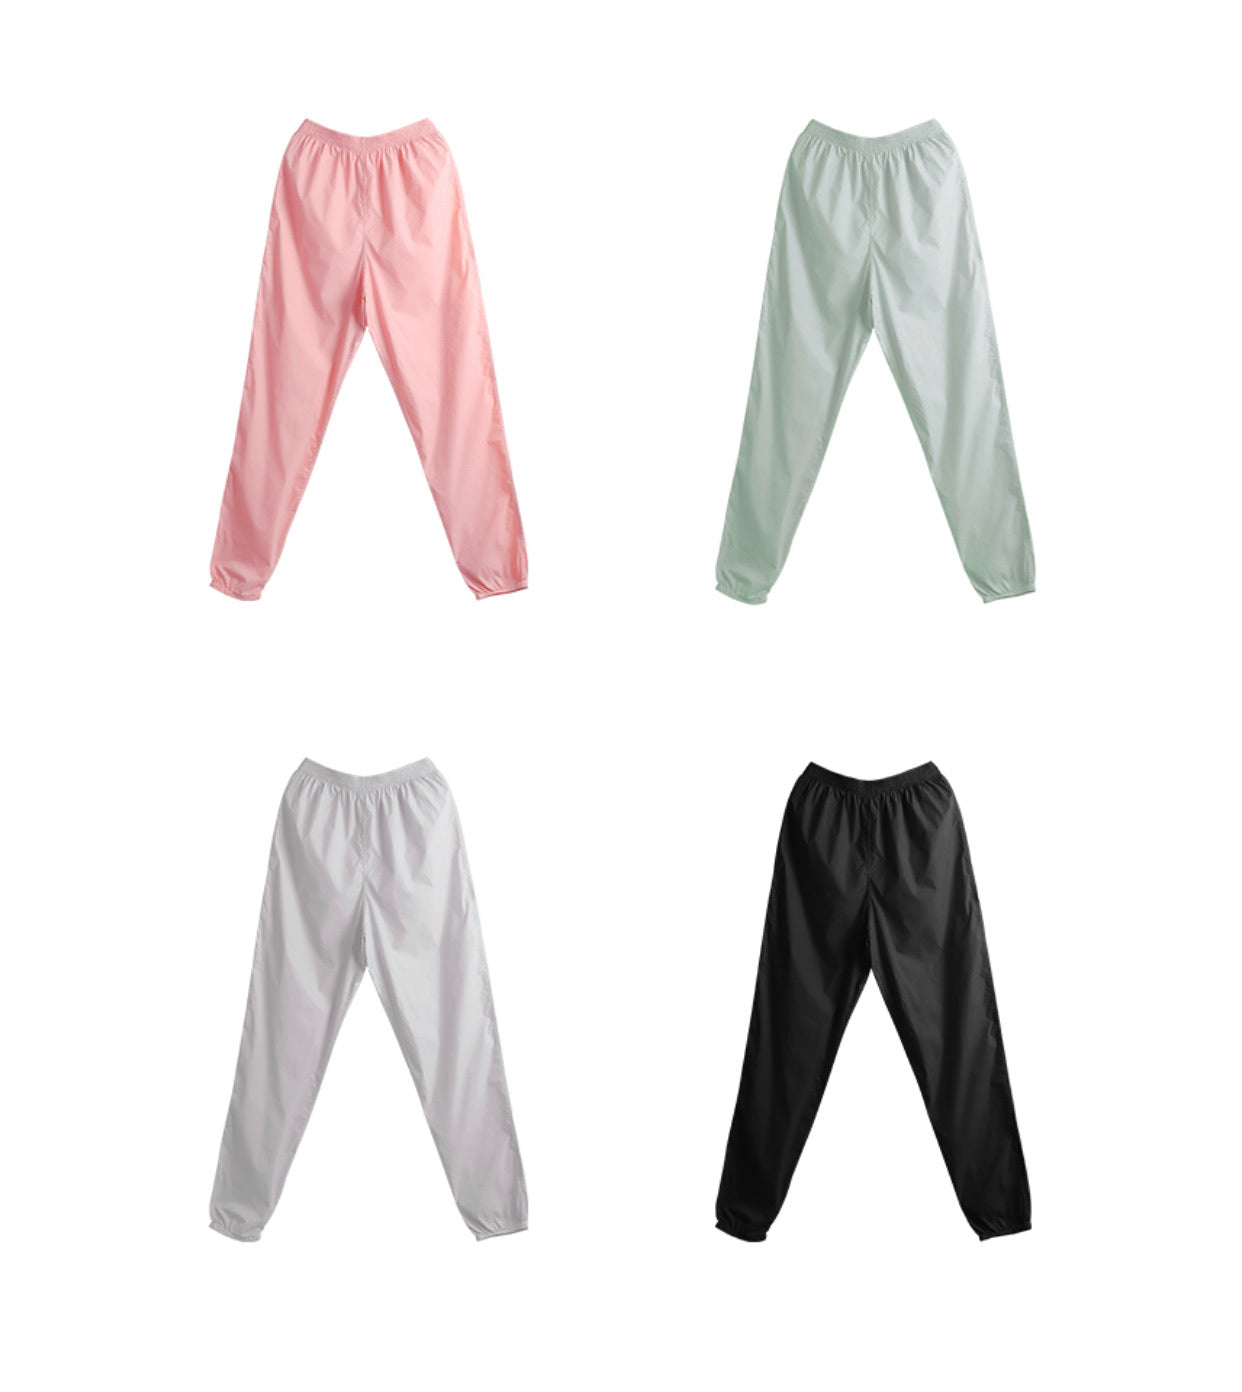 Grey trash pants / sauna pants / warmup pants for dancers from The Collective Dancewear also available in pistachio green, pink and plack